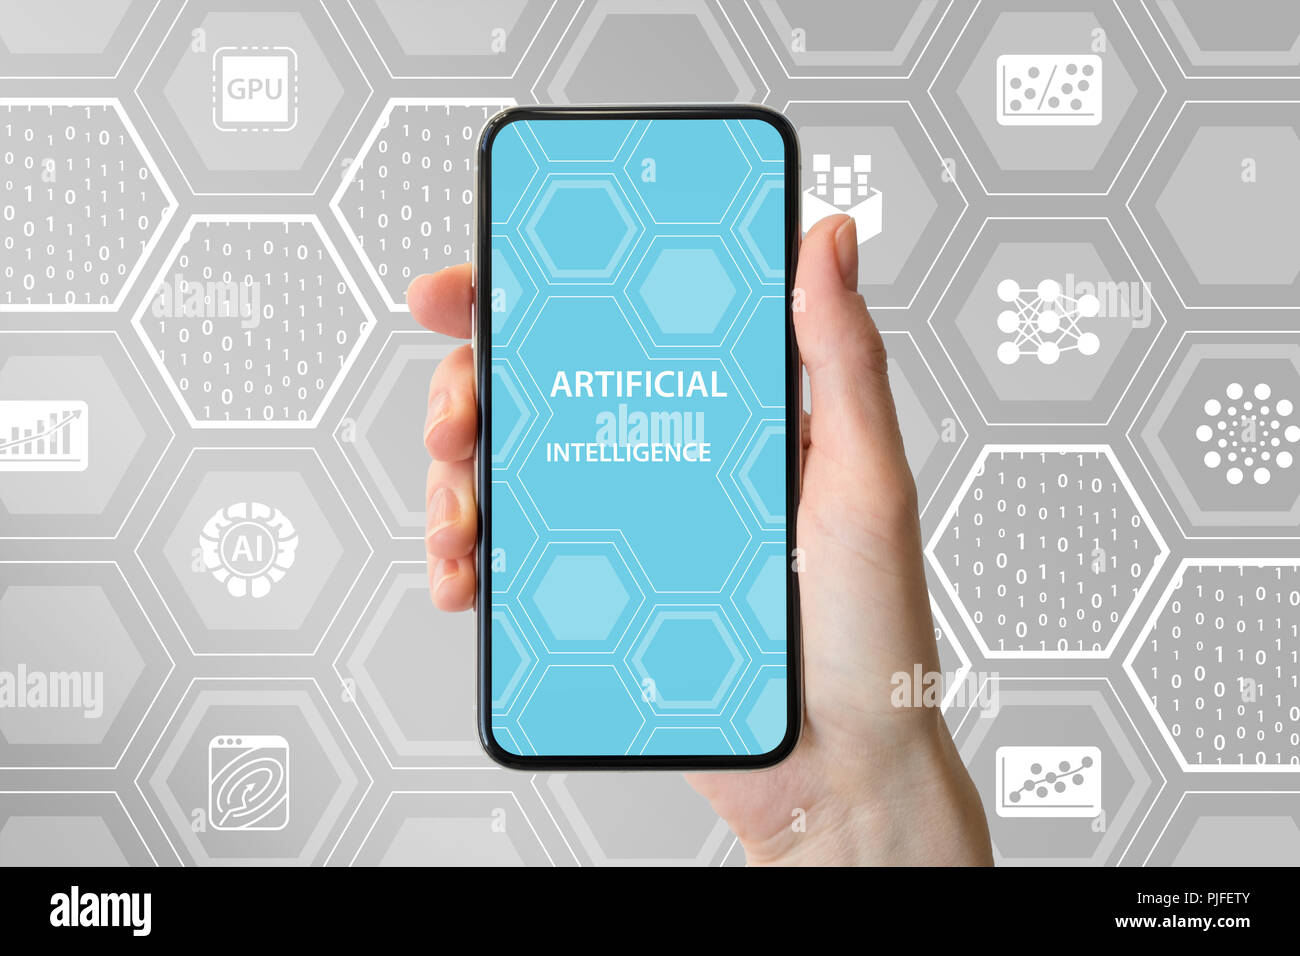 AI / artificial intelligence concept. Hand holding modern frameless smartphone in front of neutral background with icons Stock Photo